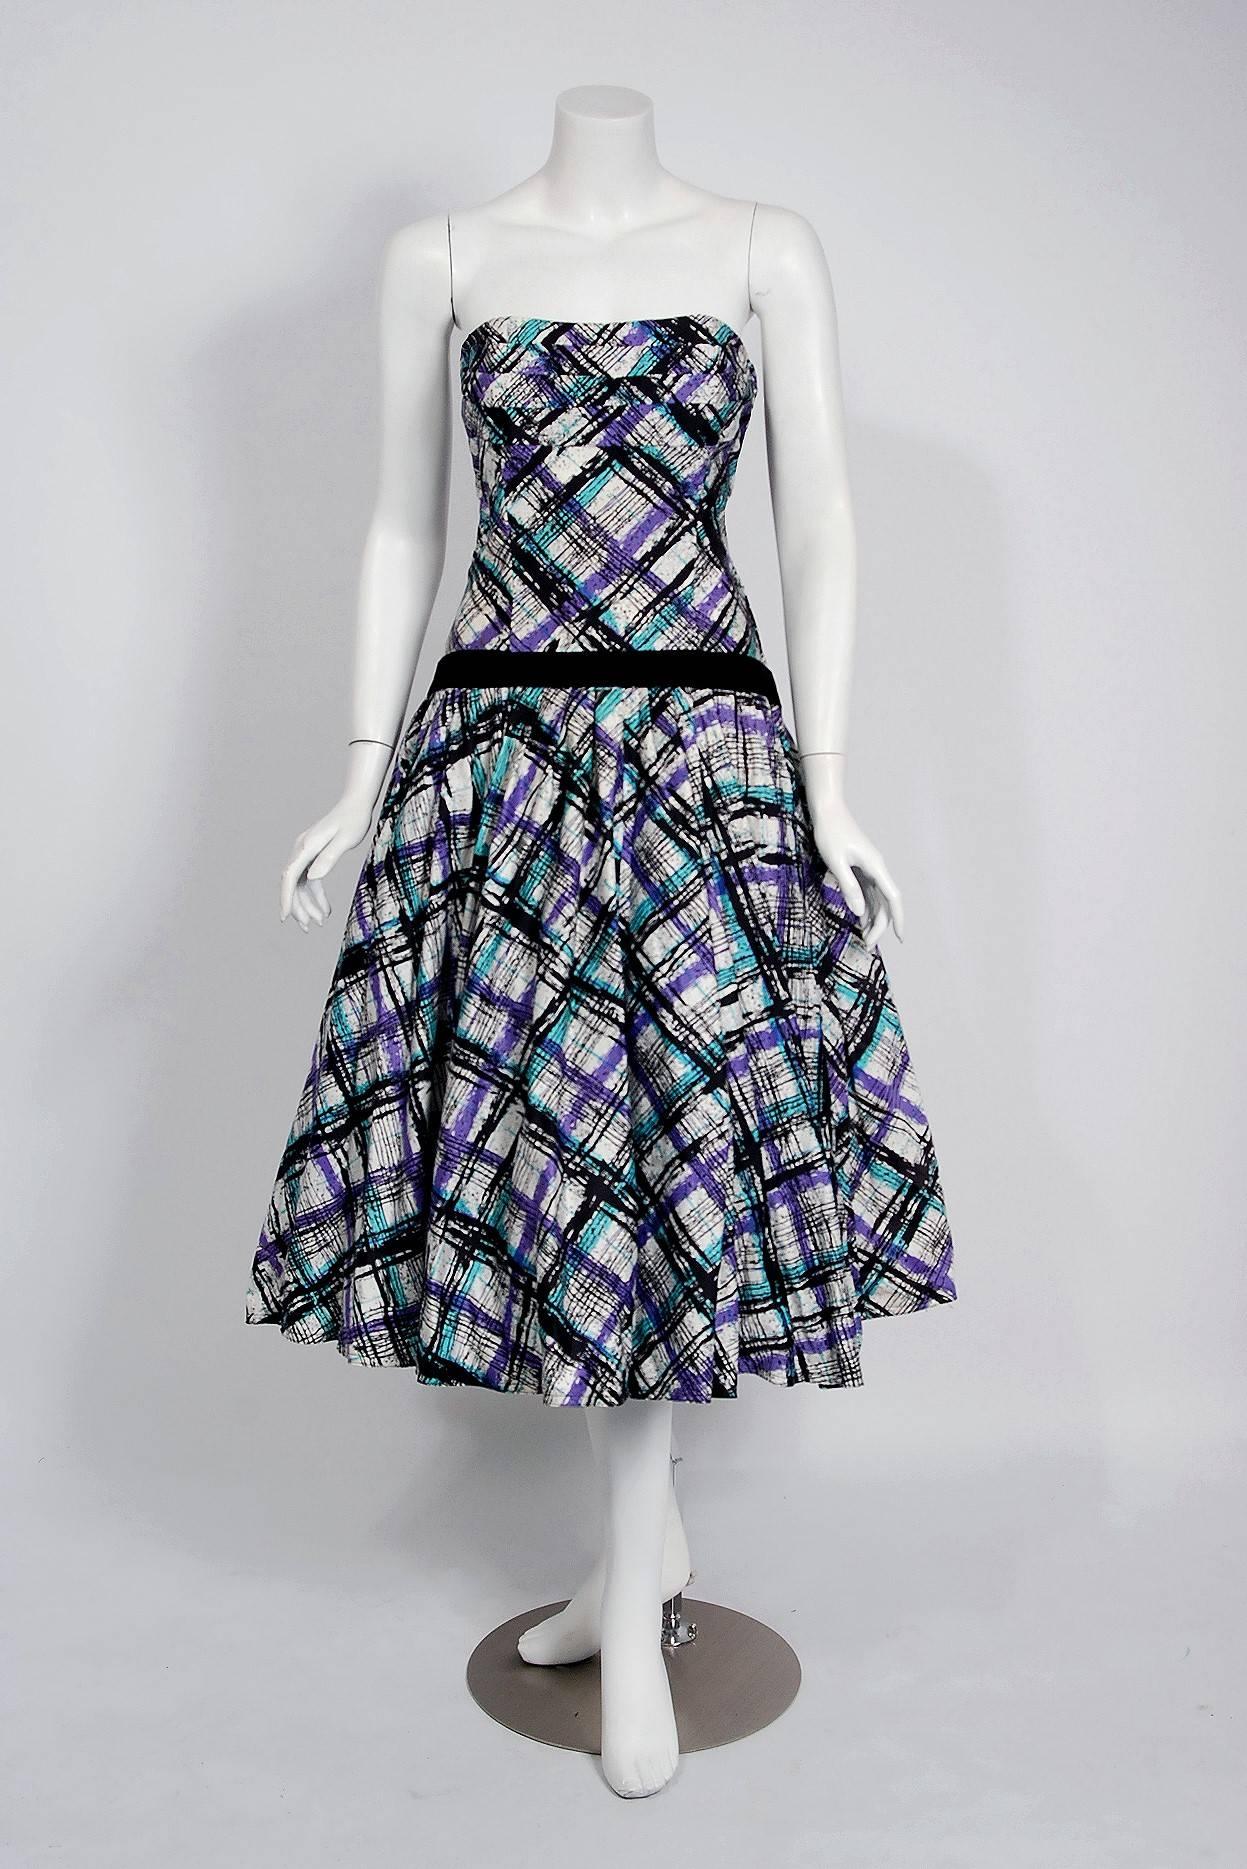 In this gorgeous 1950's graphic plaid party dress ensemble, the detailed construction and meticulous attention to detail are comparable to what you will find in modern couture. This enchanting garment is fashioned from turquoise, purple and black